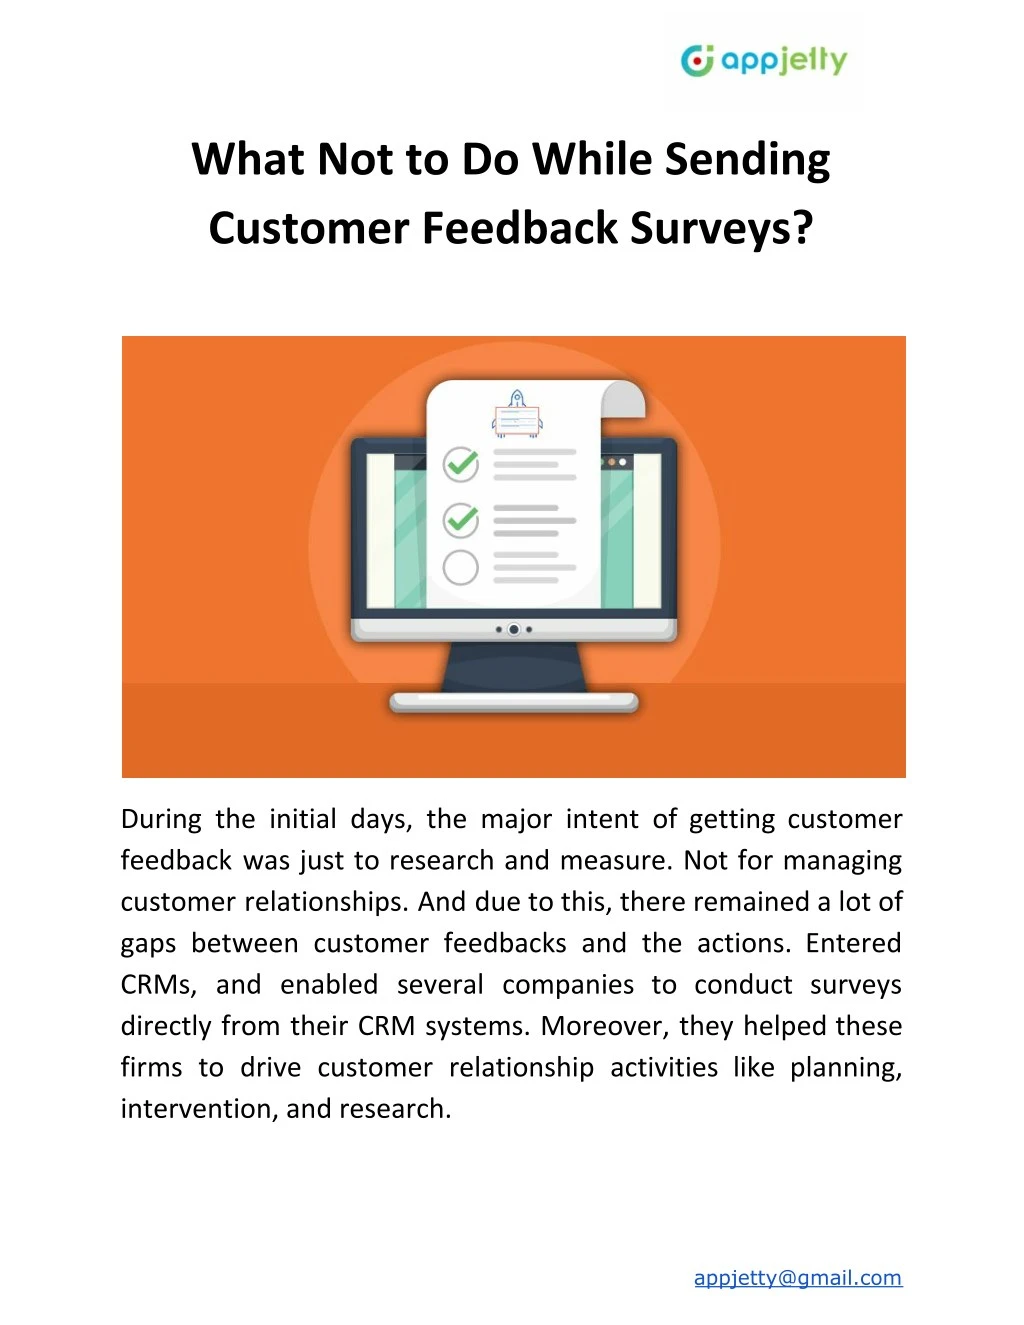 what not to do while sending customer feedback